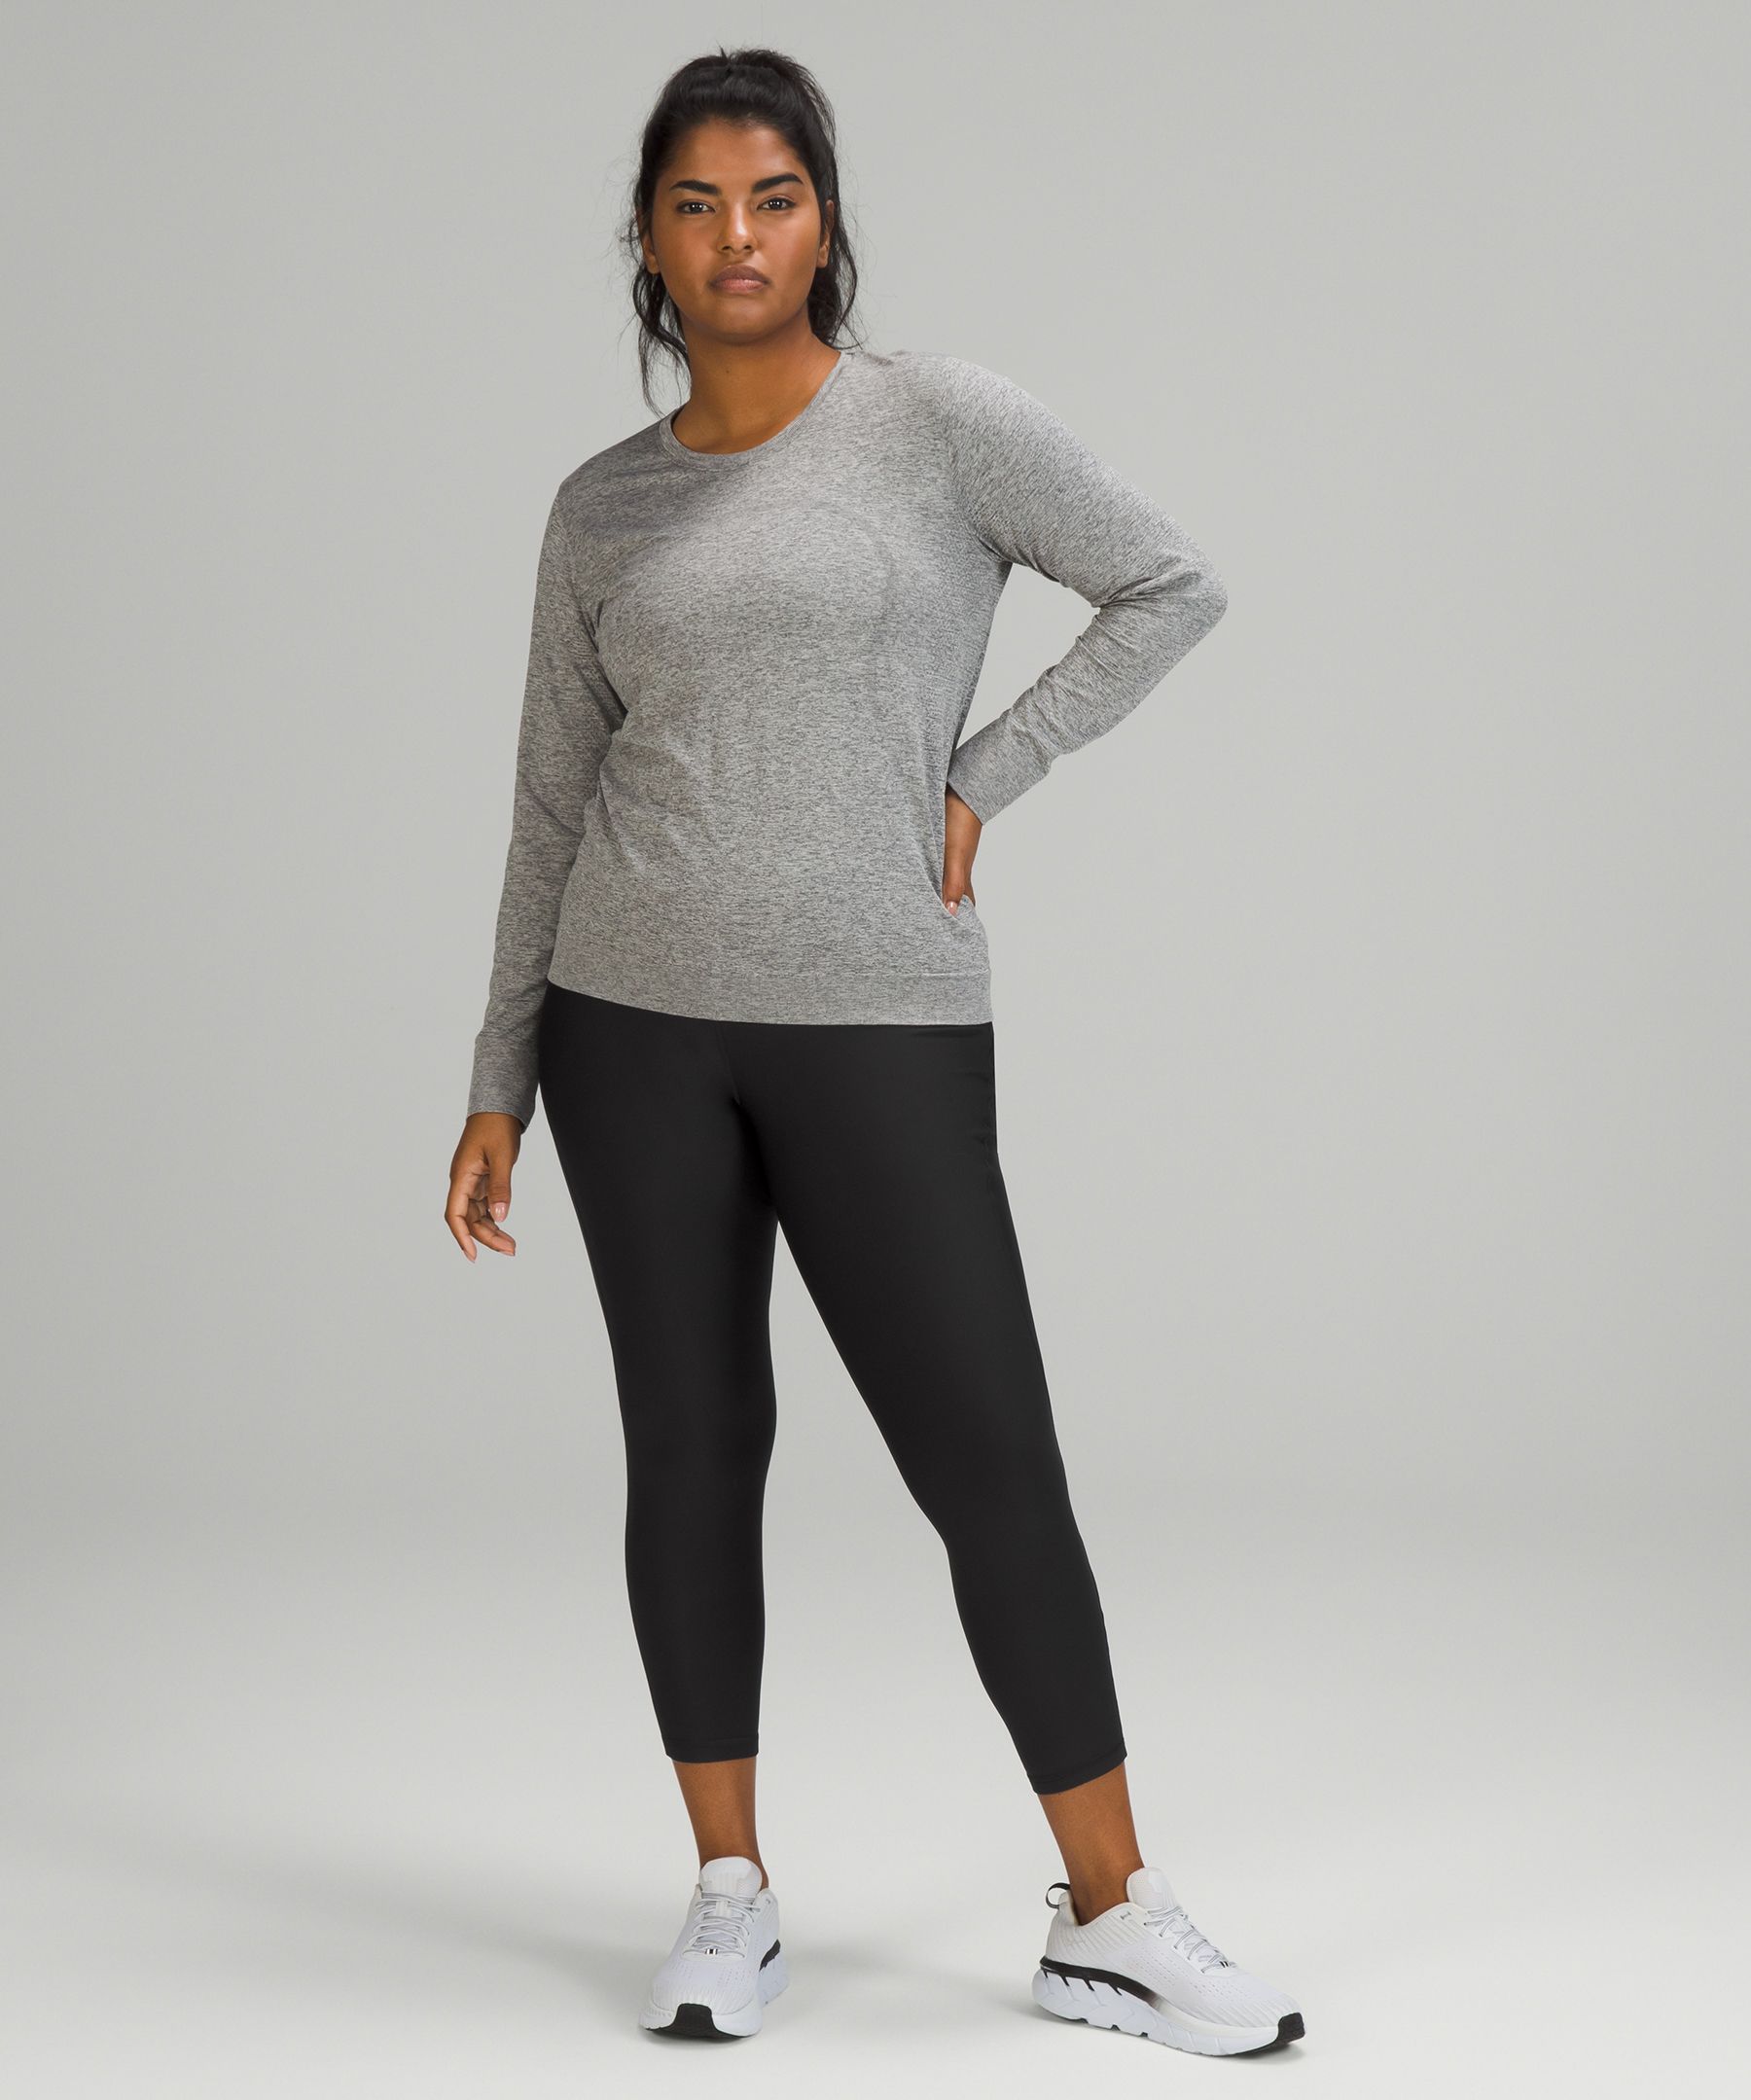 Lululemon Athletic Base Pace HR Tight Yoga Pants 2-Toned Grey Women's Size  8 - Athletic apparel